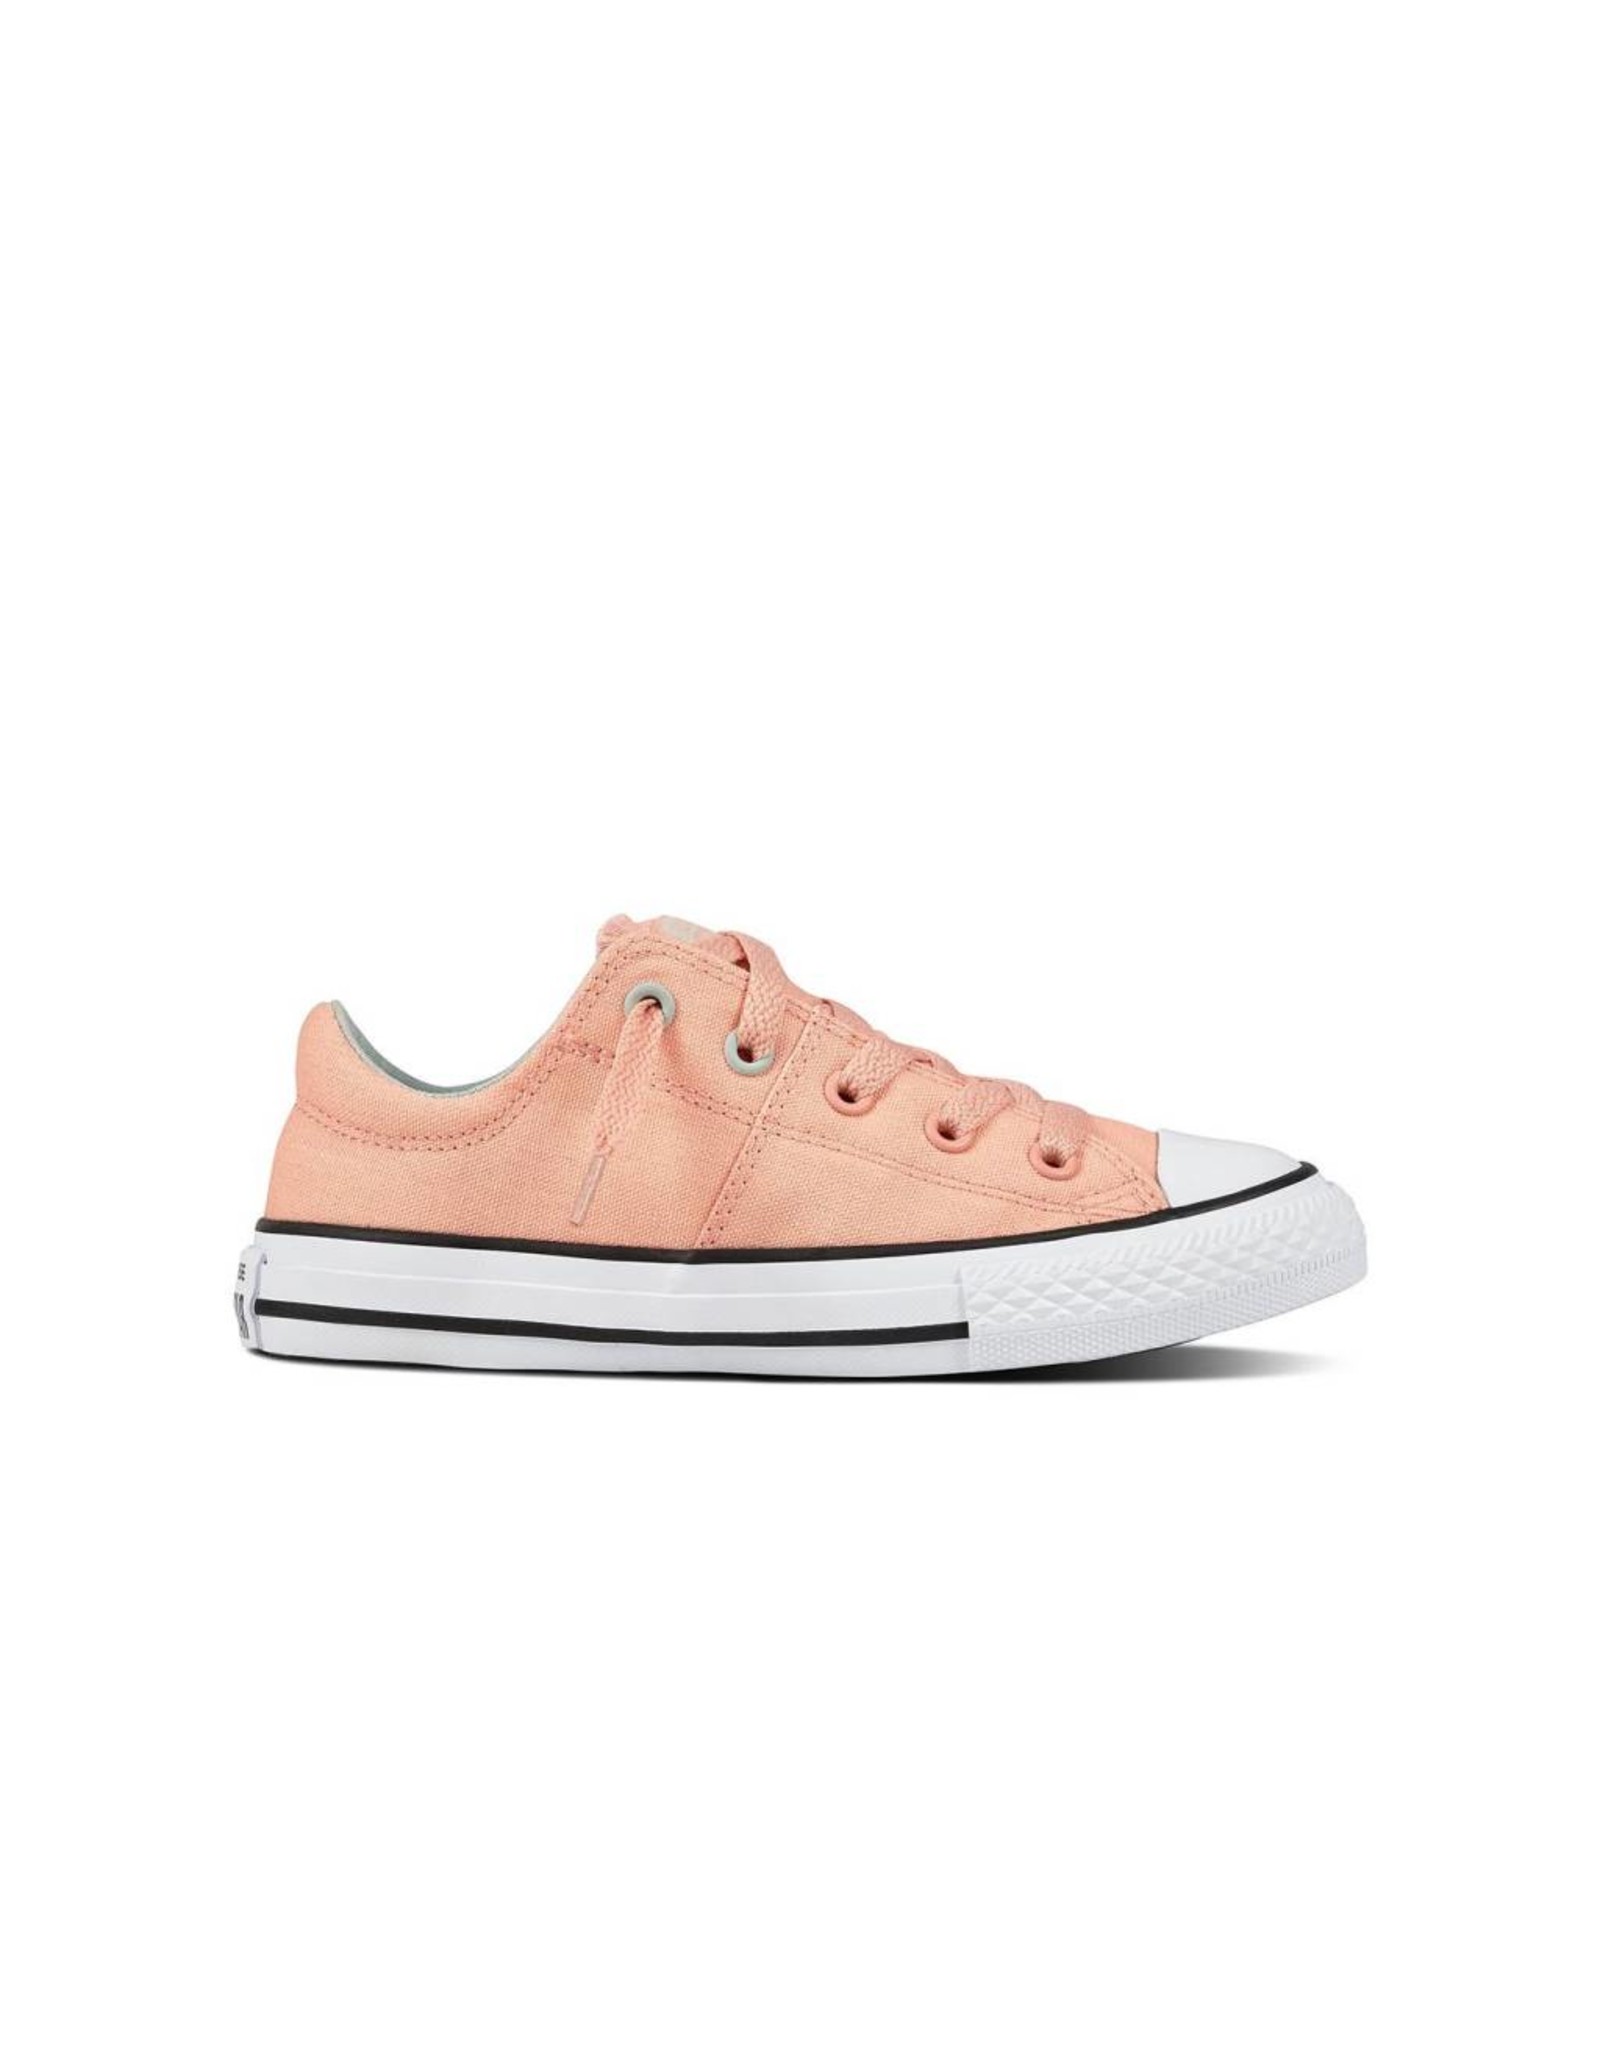 CHUCK TAYLOR MADISON OX PALE CORAL/DRIED BAMBOO CYMAP-659952C